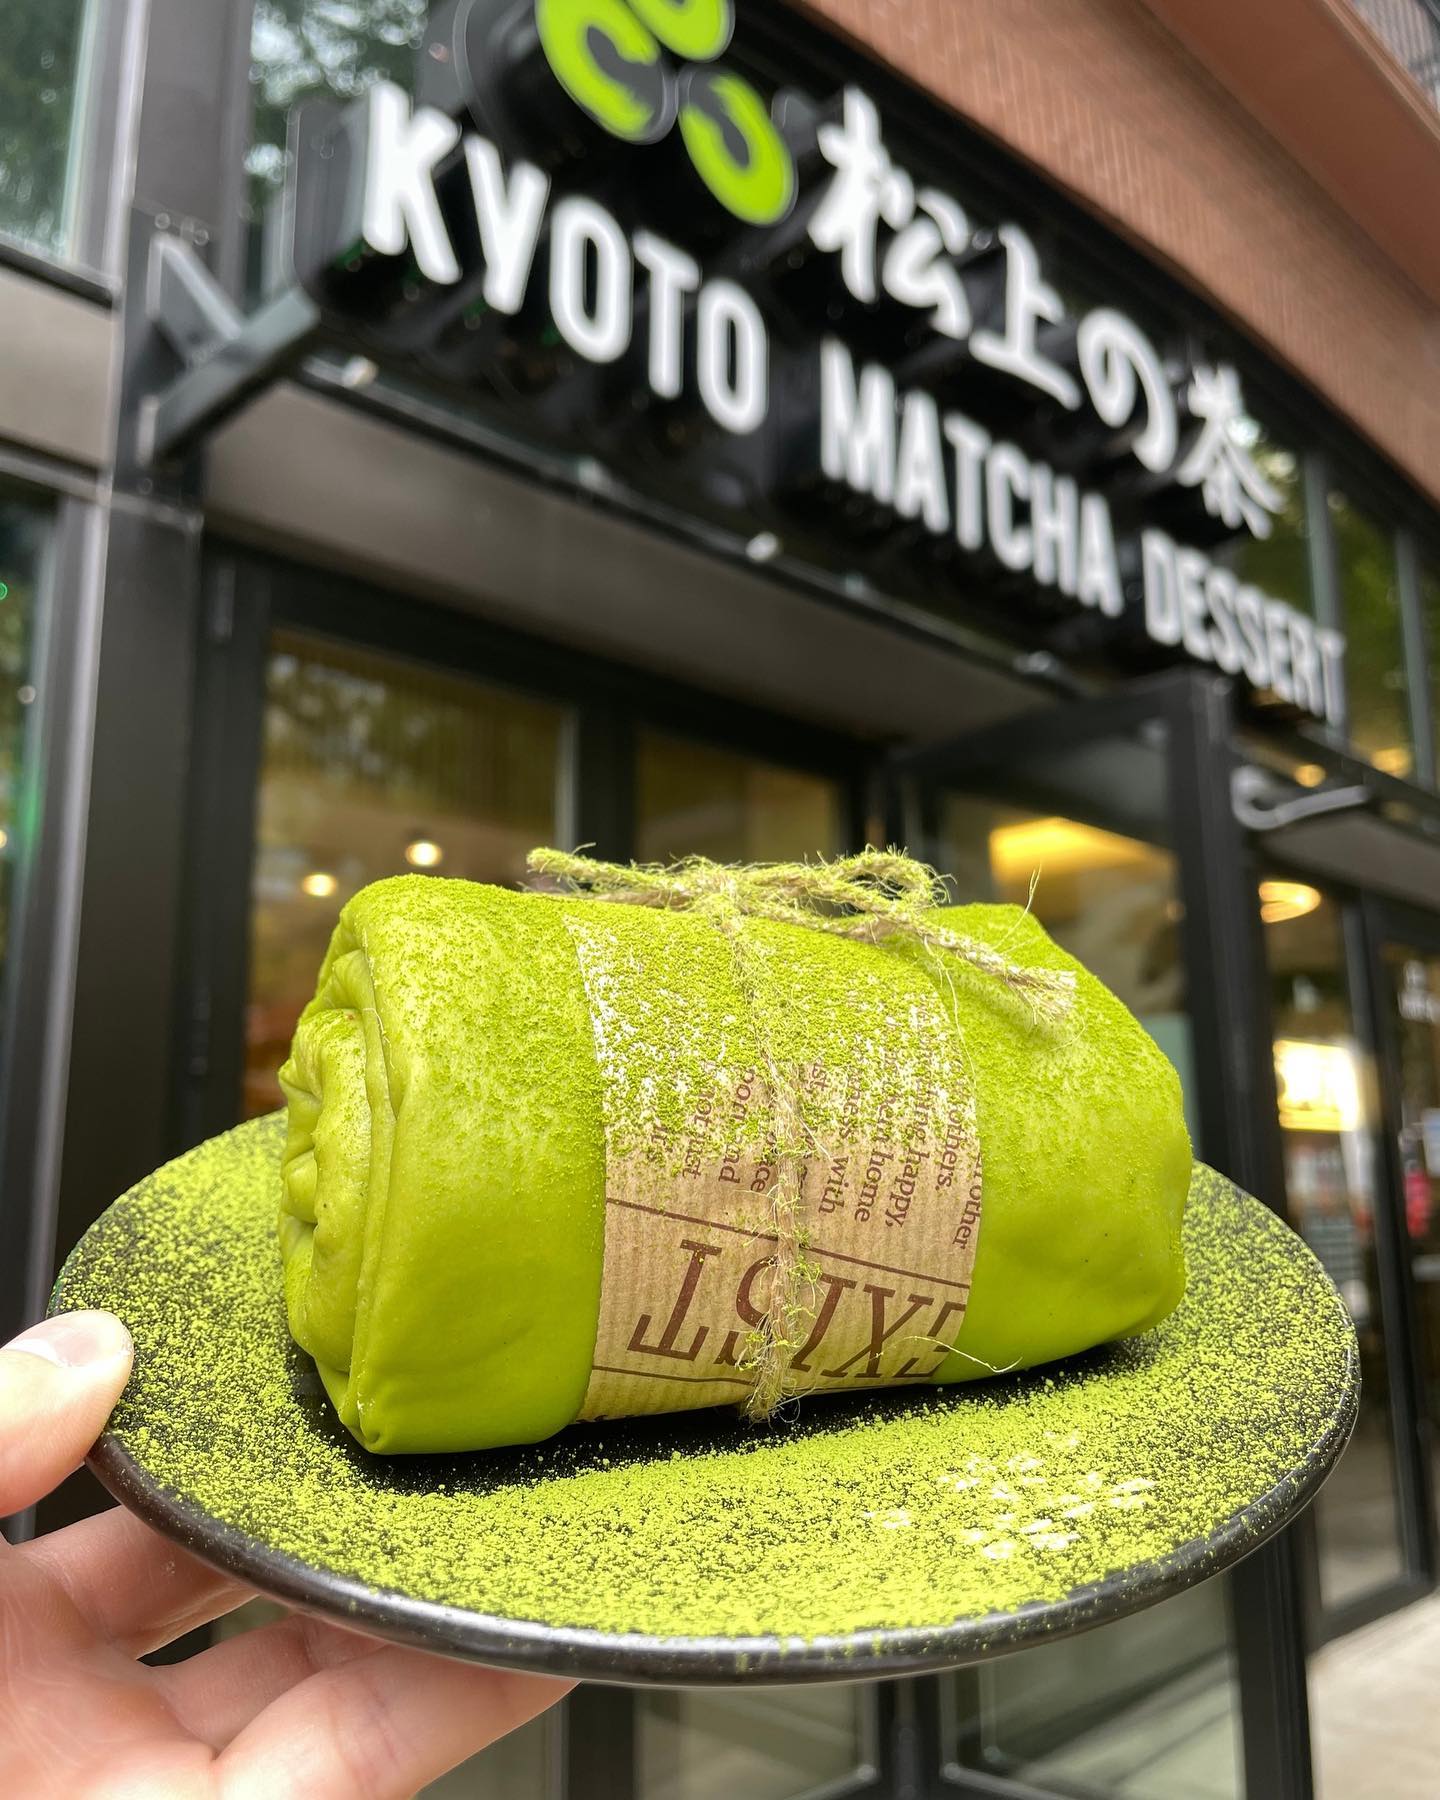 Kyoto Matcha and Gong Cha Open This Week at The Block in Pike & Rose - The  MoCo Show